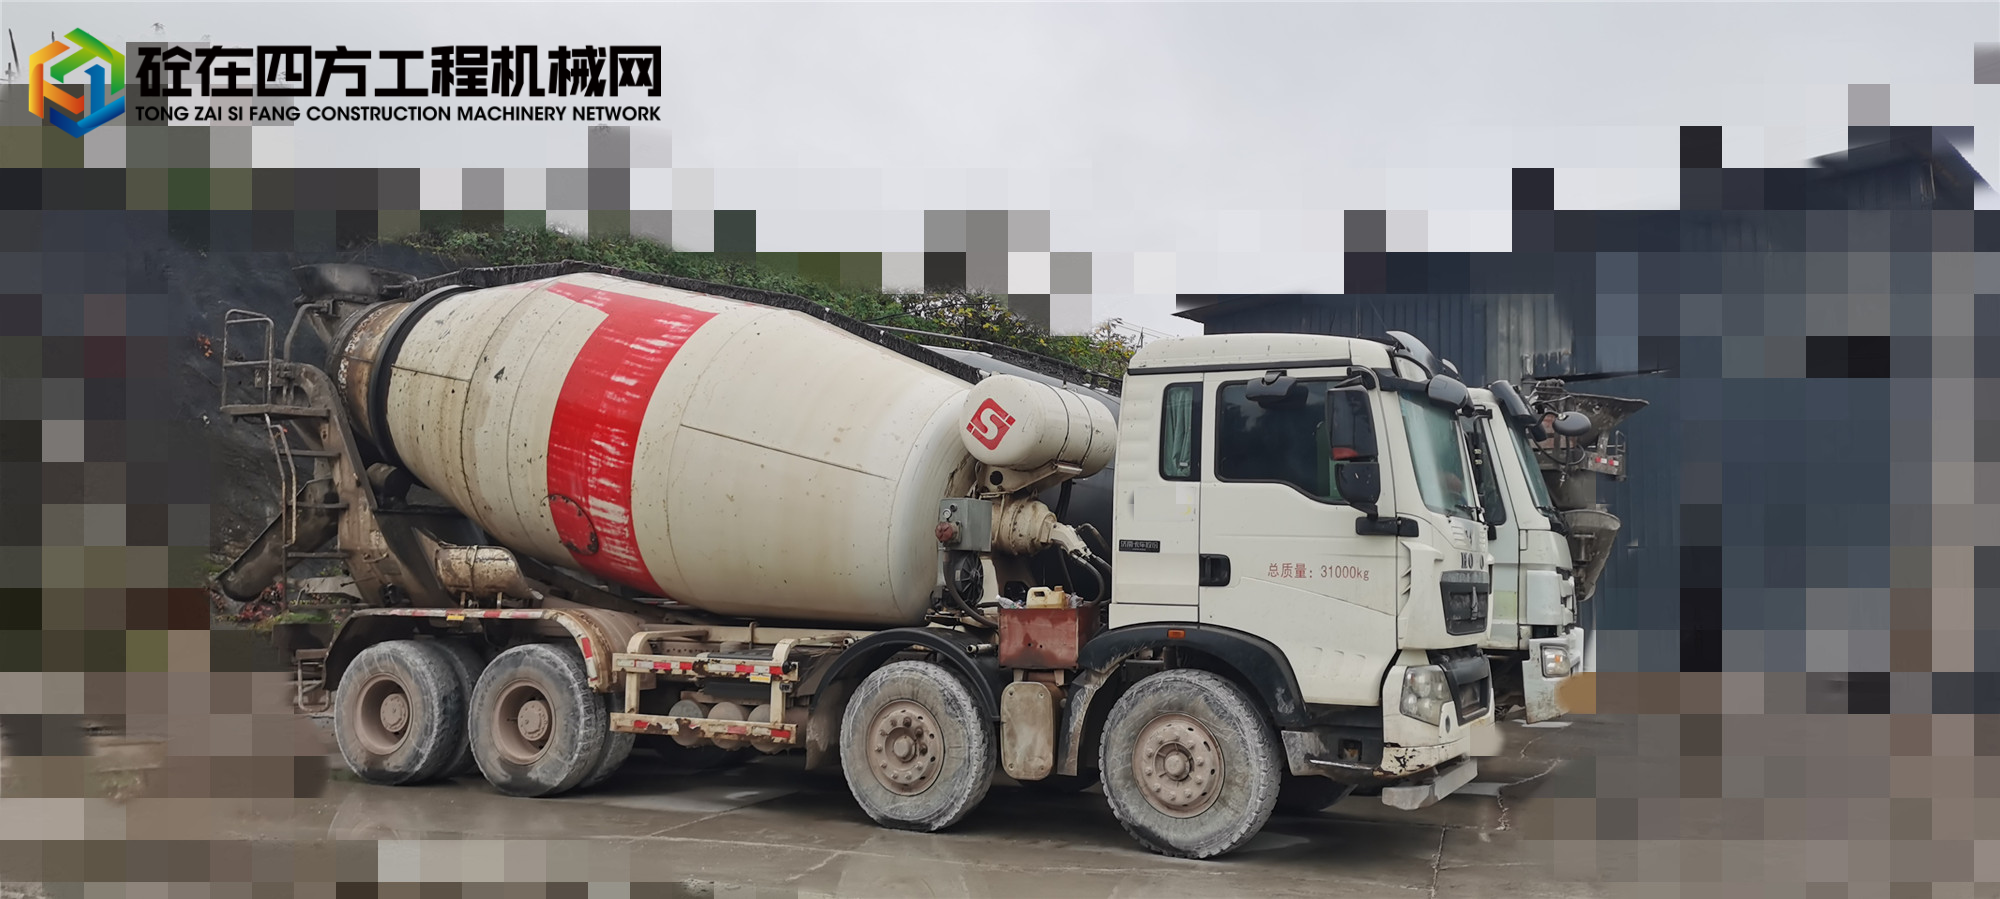 https://images.tongzsf.com/tong/truck_machine/20231201/165695a9640f4a.jpg